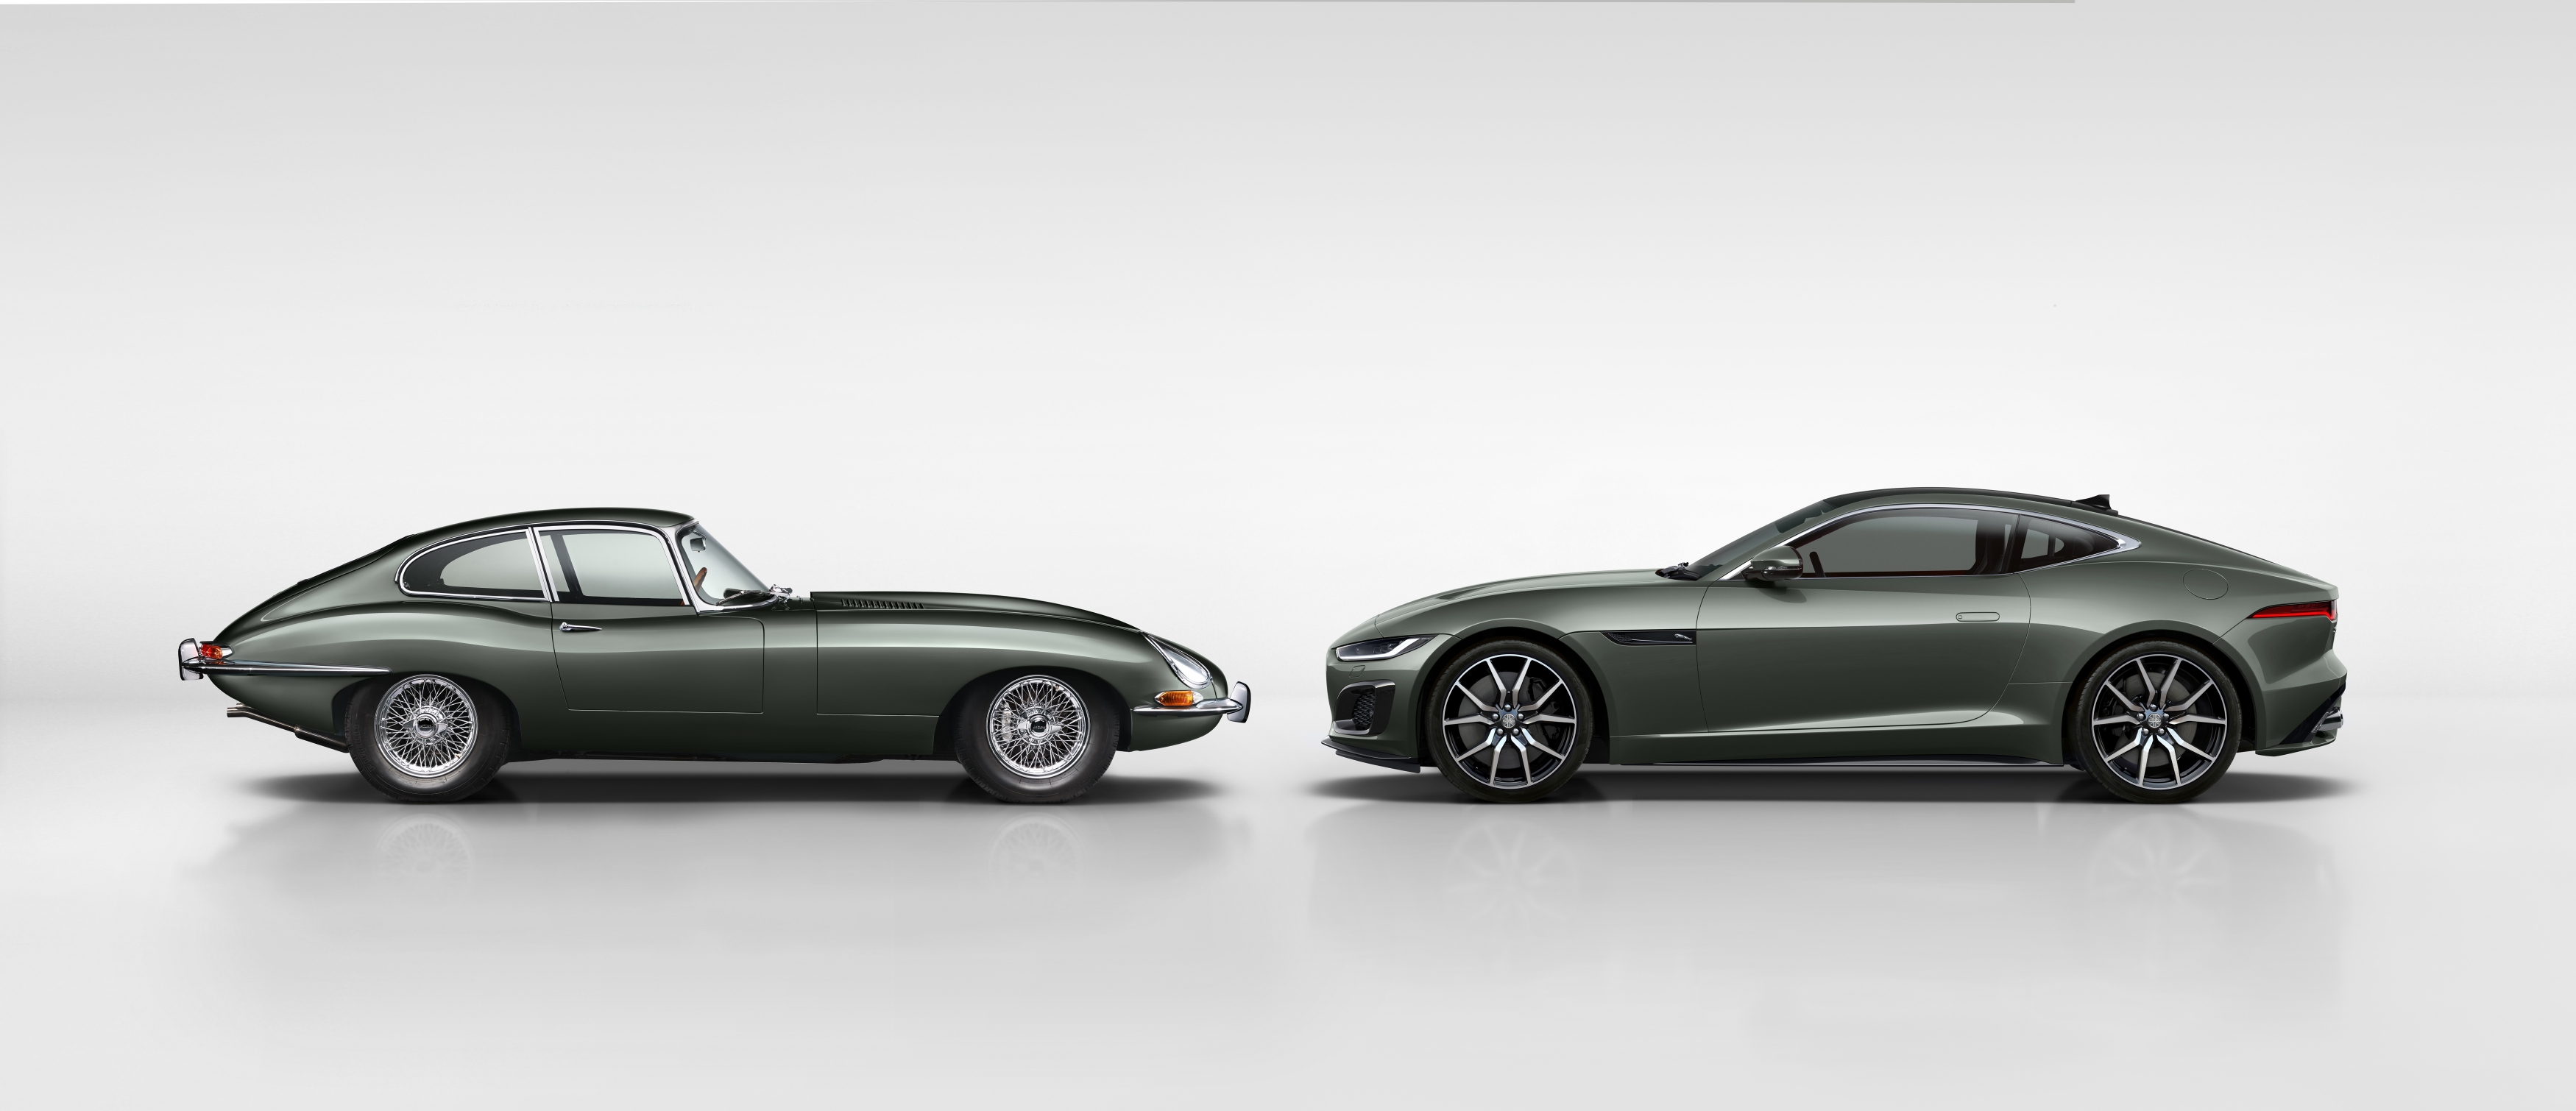 Jaguar F-TYPE Heritage 60 Edition Pays Homage to Iconic E-type